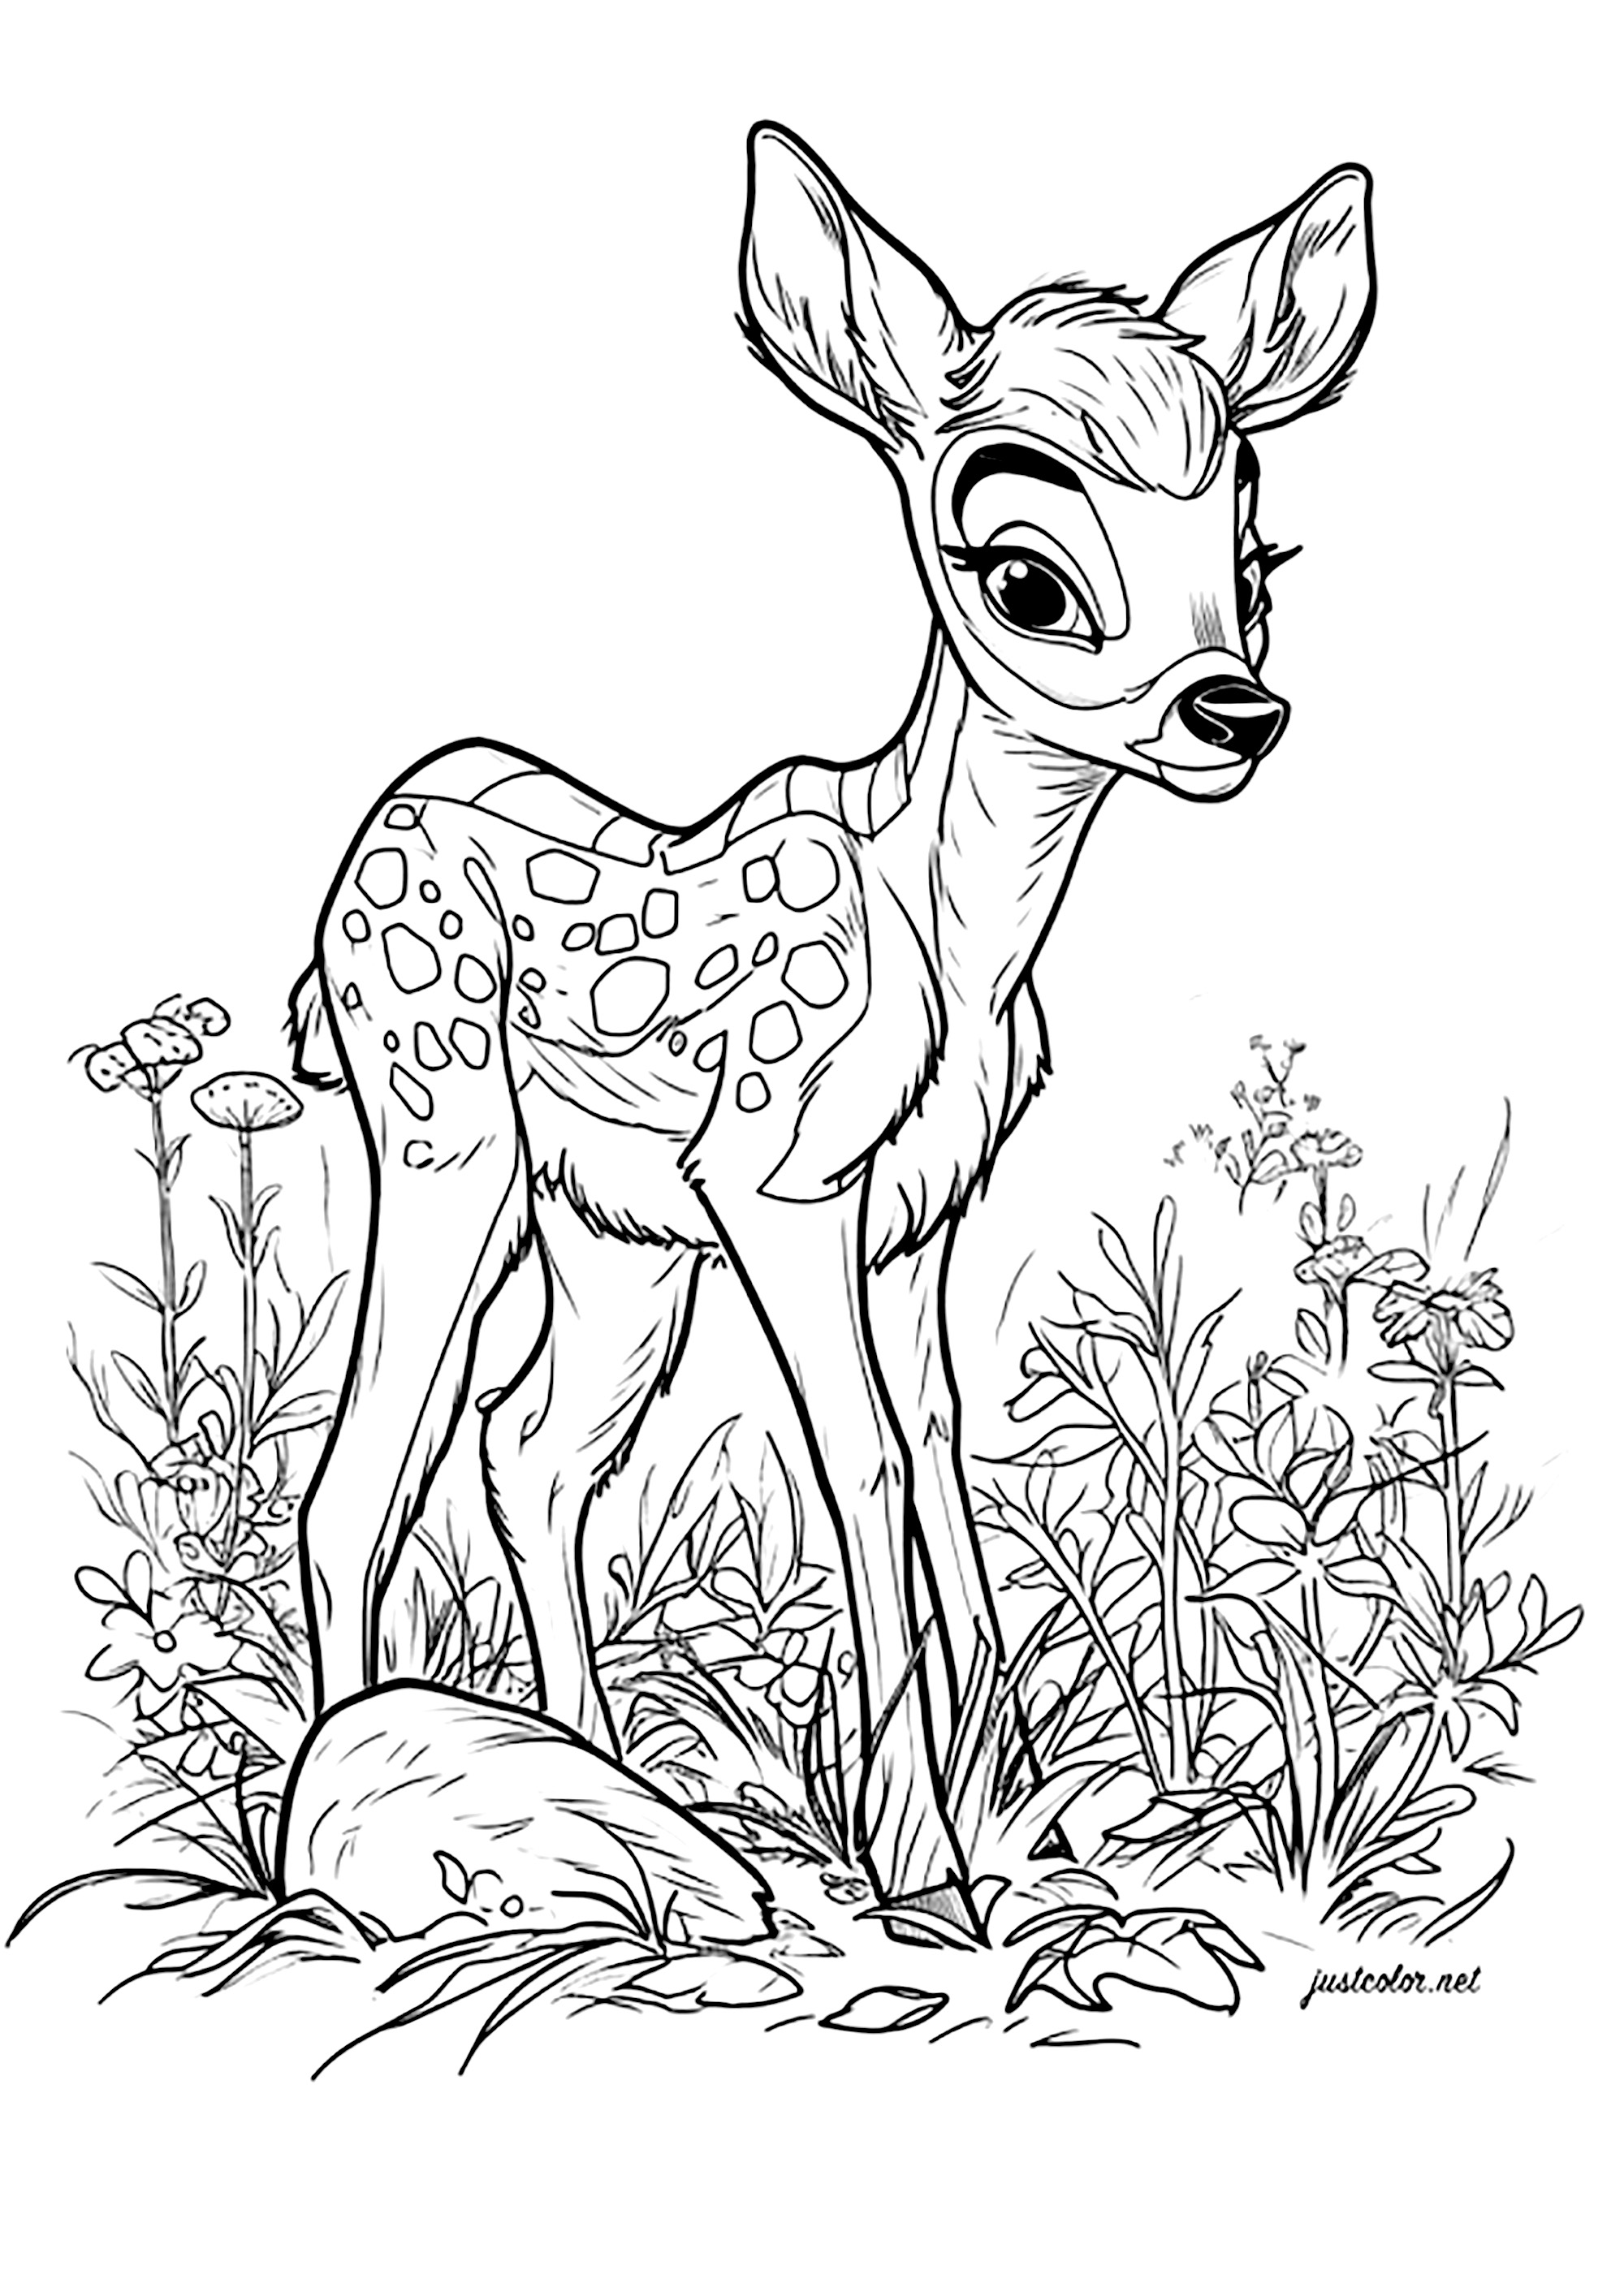 Coloring page : Fawns - 3